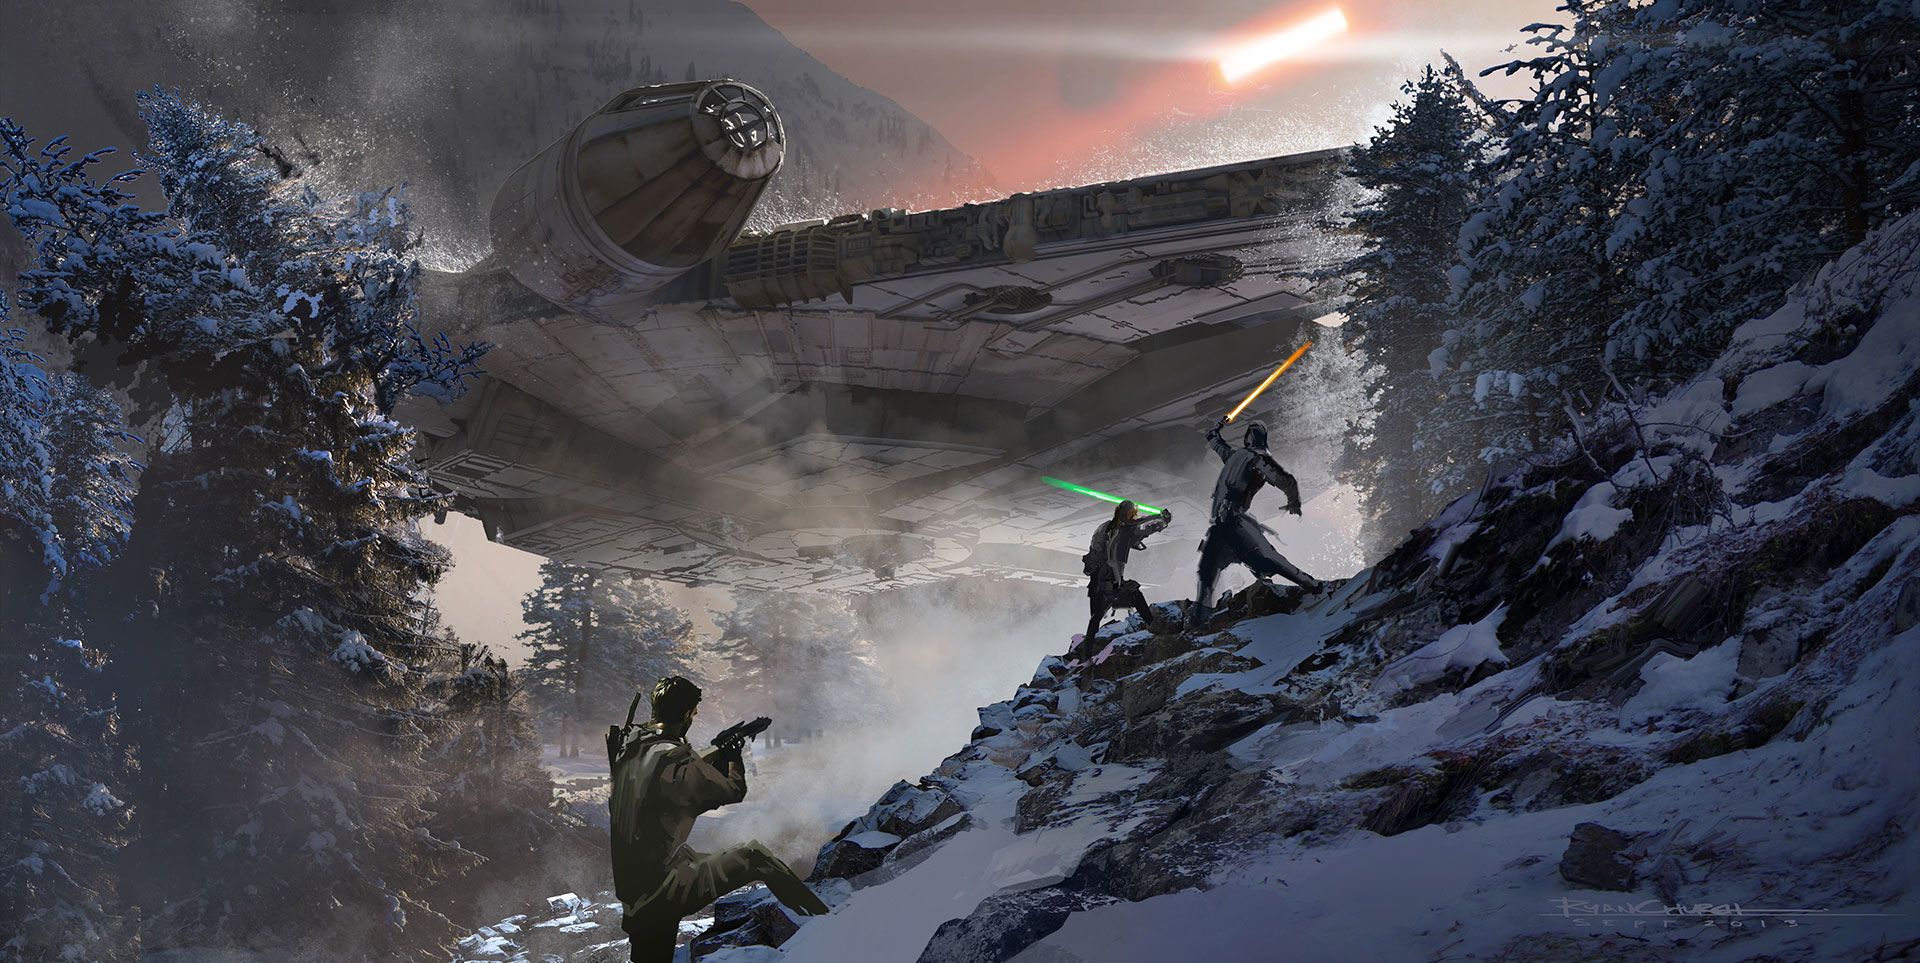 Star Wars: The Force Awakens Concept Art Images Revealed | Collider